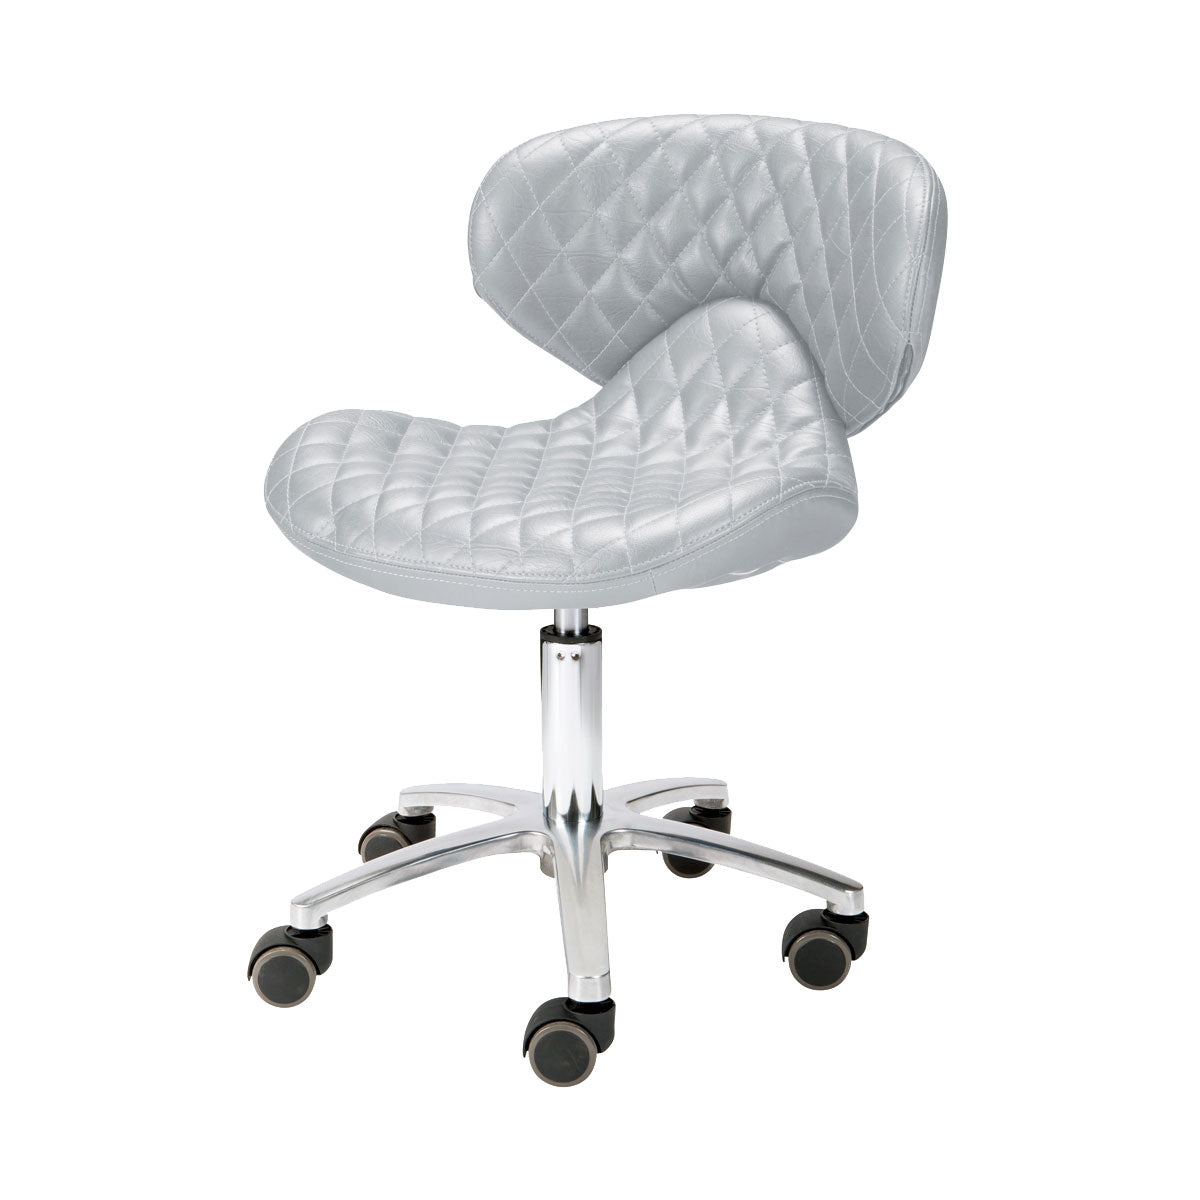 Lexi Diamond Quilted Manicure Technician Stool - 1009H - Salon and Spa Furniture - Silver